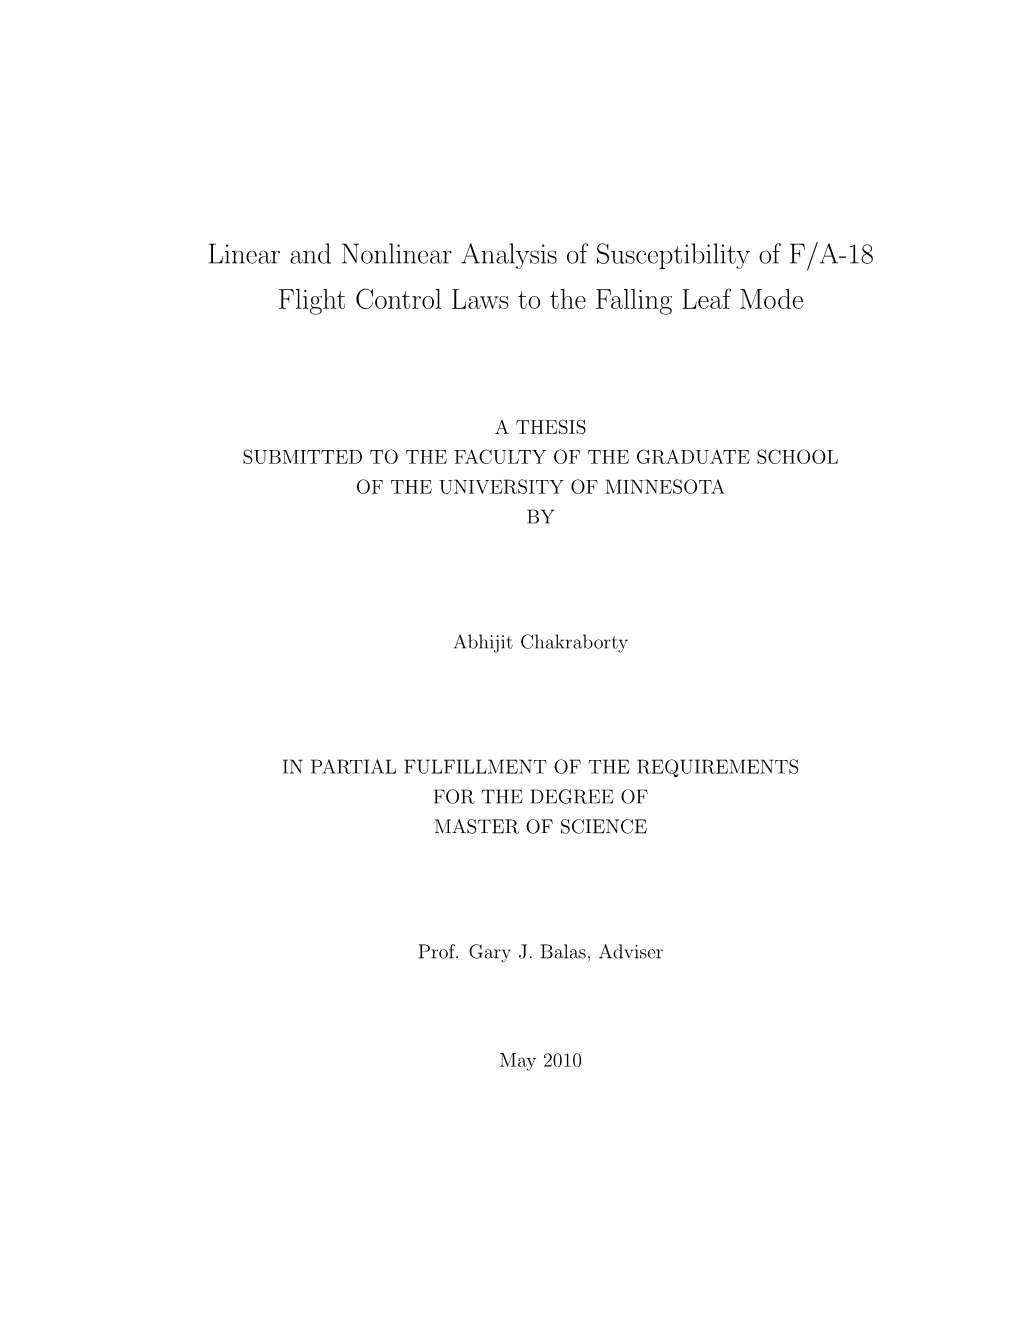 Linear and Nonlinear Analysis of Susceptibility of F/A-18 Flight Control Laws to the Falling Leaf Mode